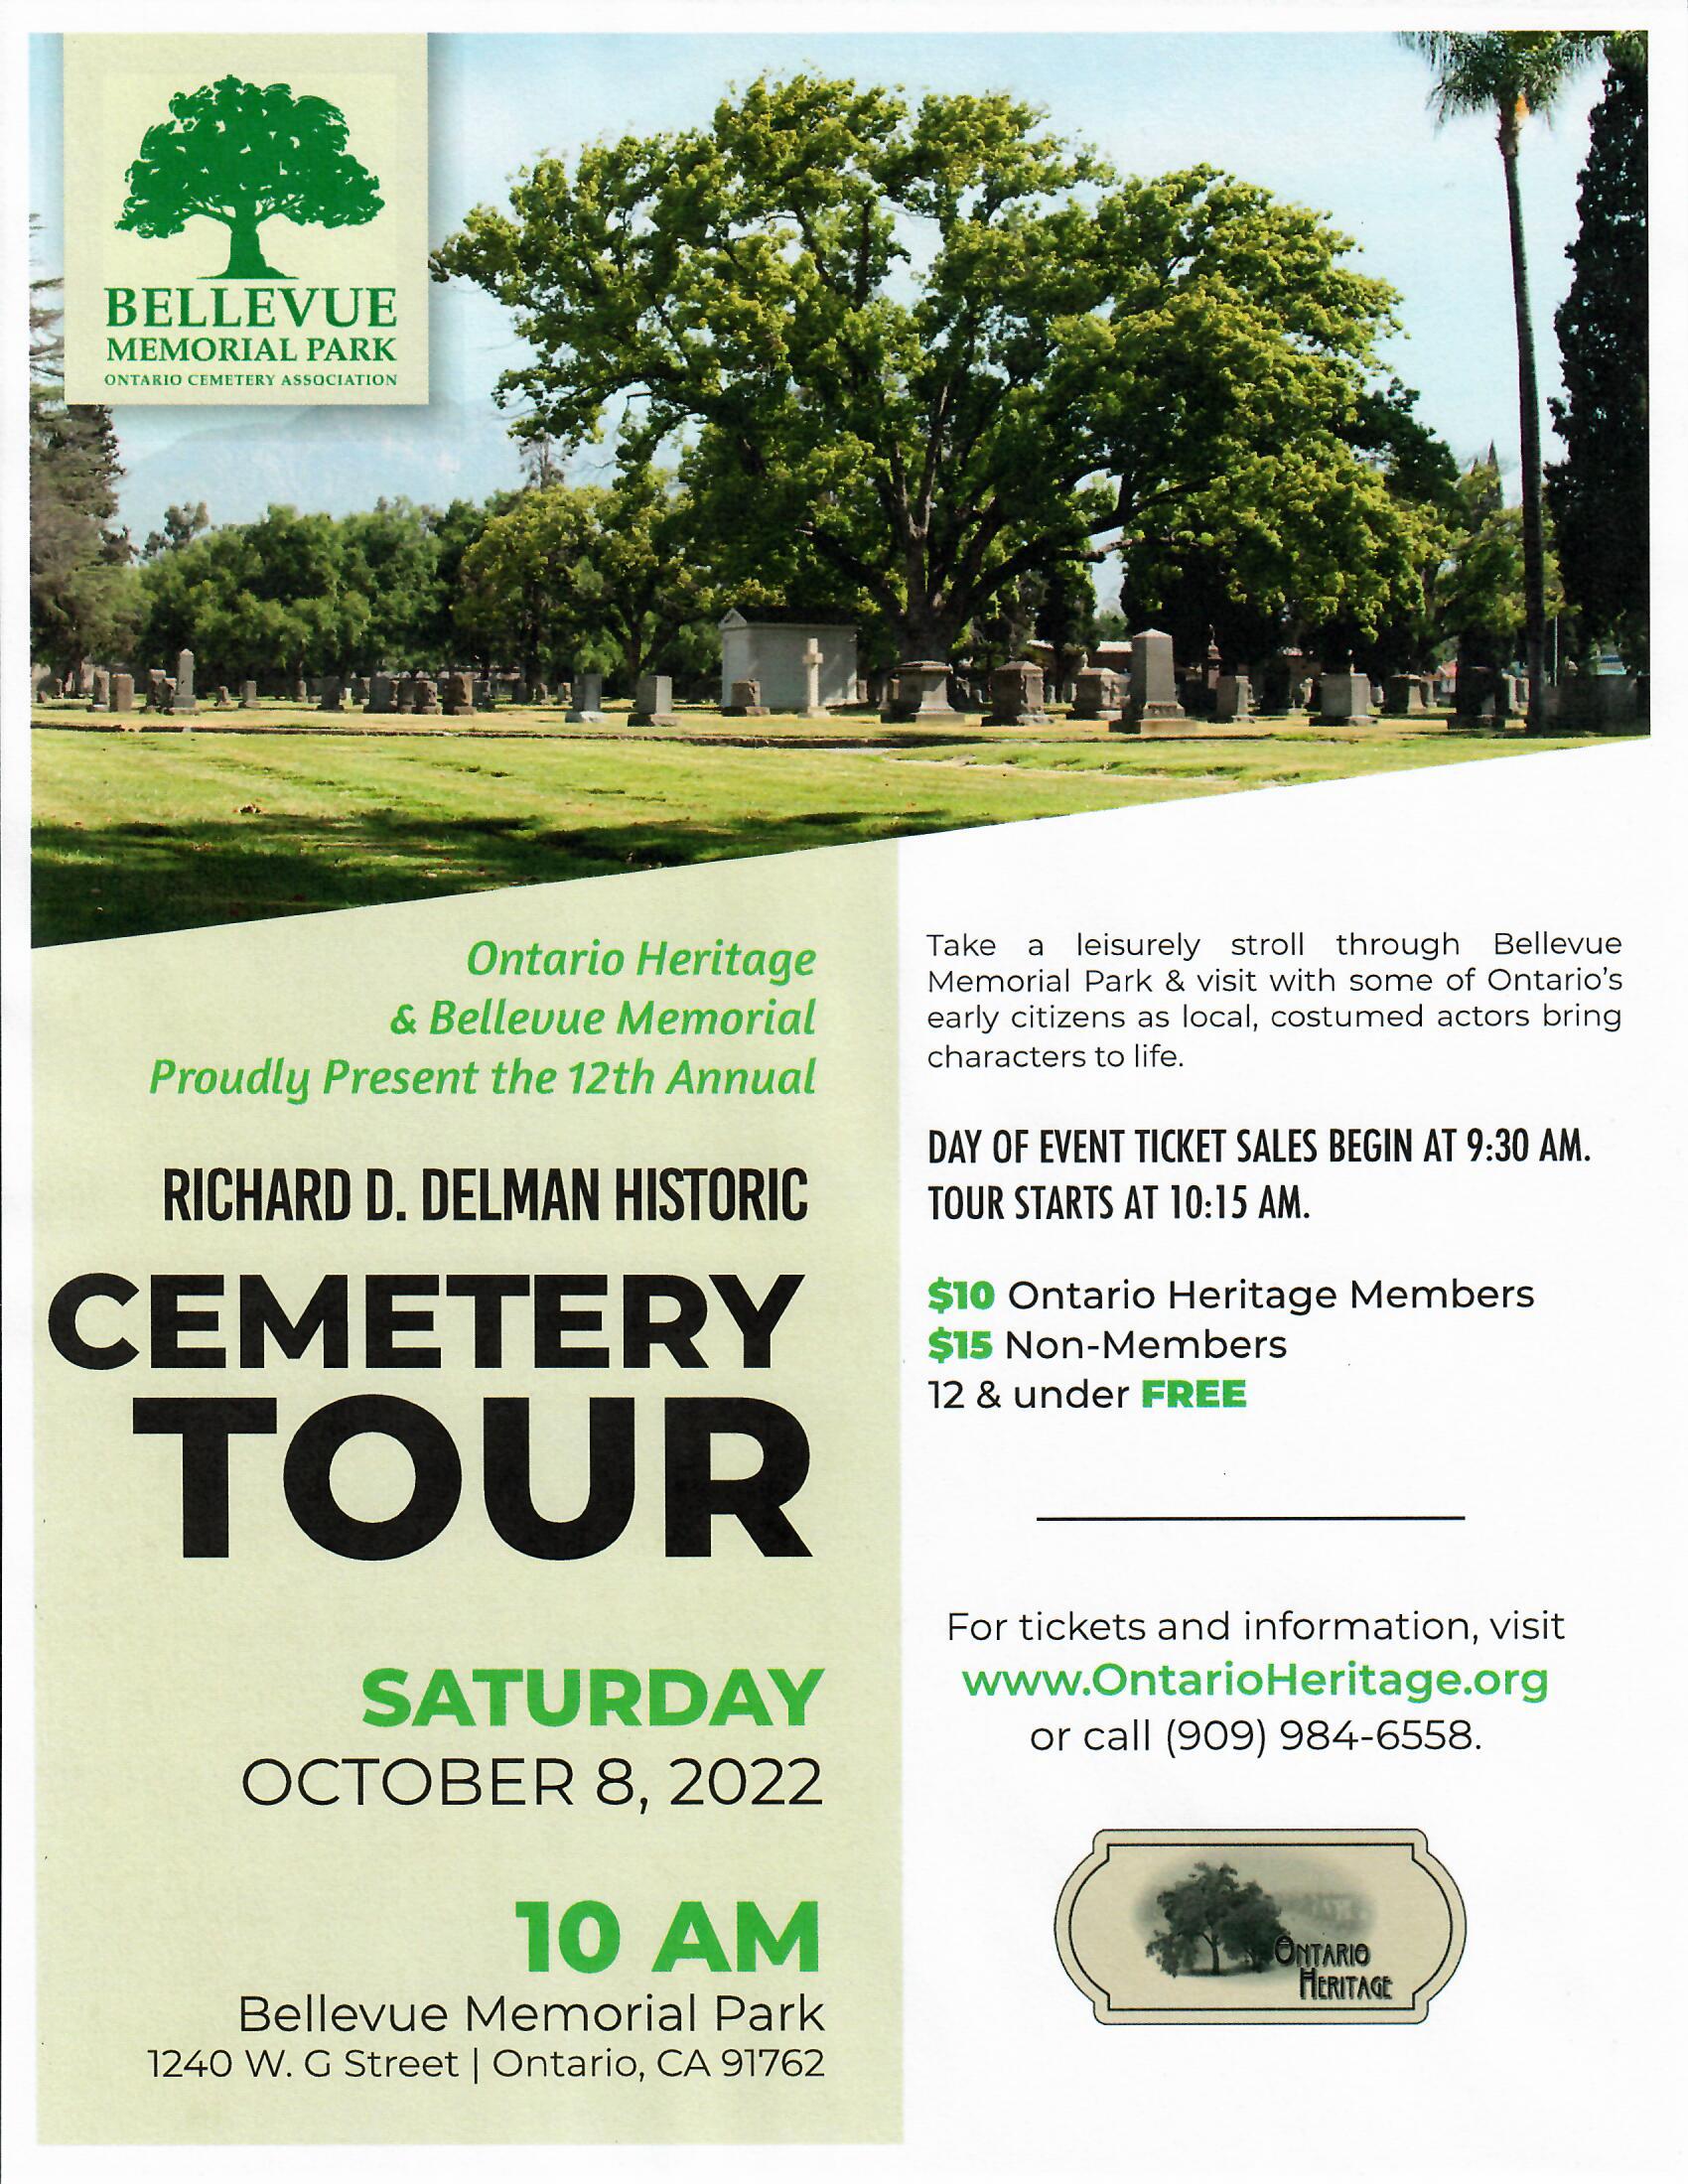 OH 2022 Cemetery Tour Flyer